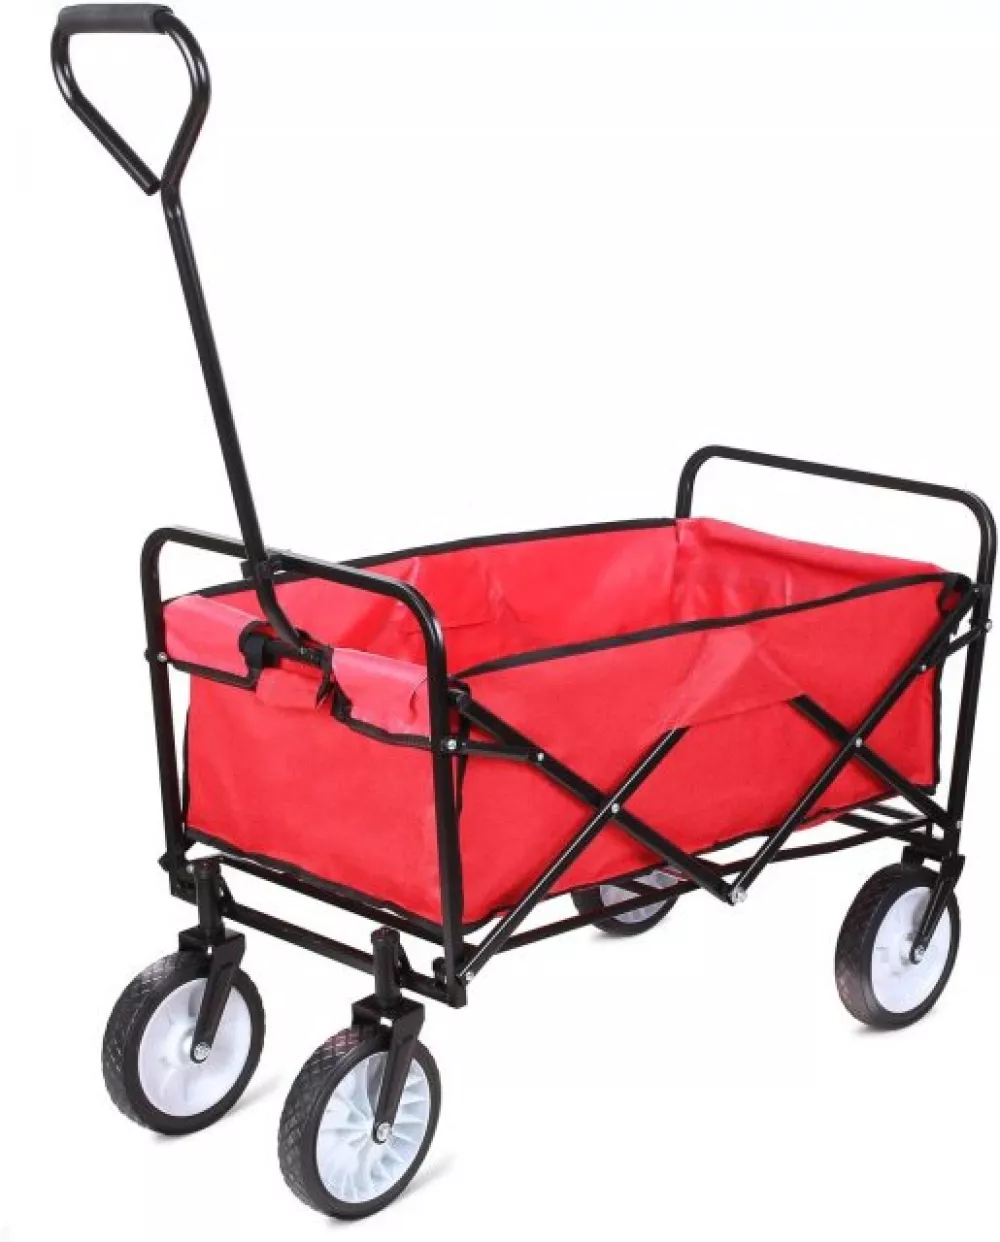 Portable Hand Folding Outdoor Utility Wagon for Heavy Duty, Garden, Shopping with All Terrain Wheels and Bag